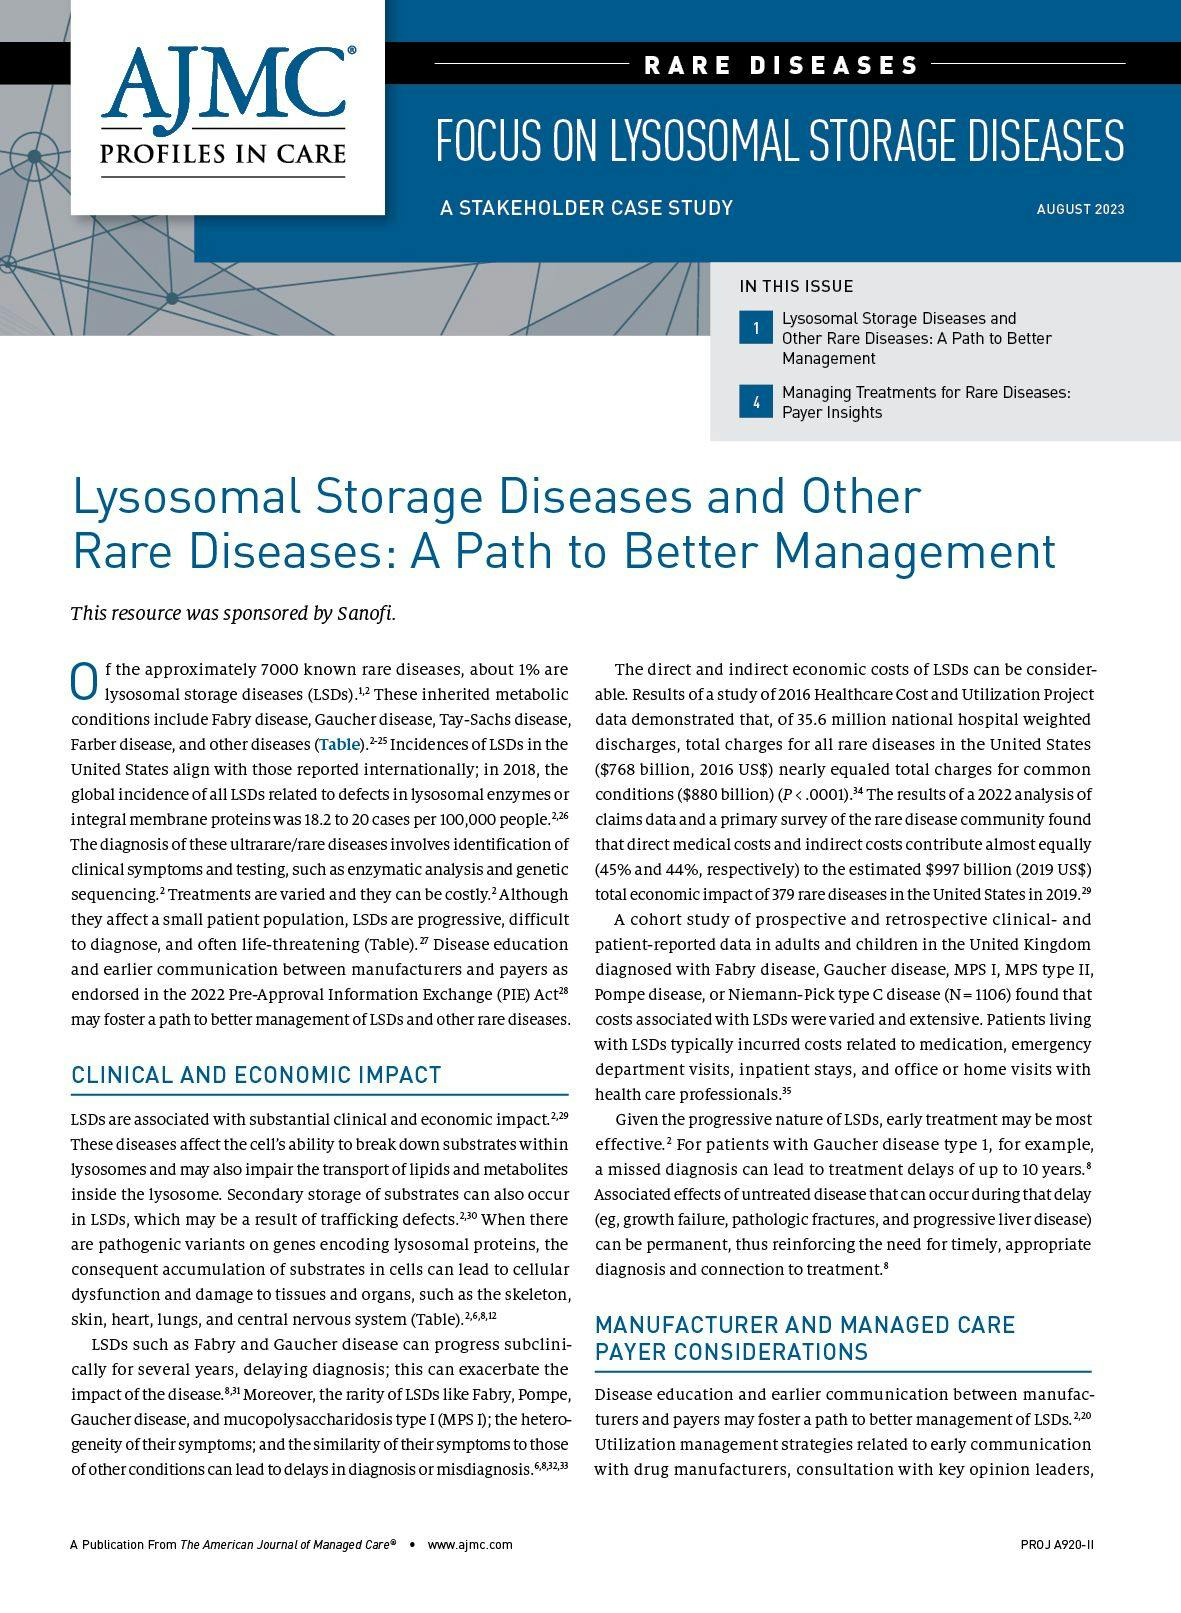 Lysosomal Storage Diseases and Other Rare Diseases: A Path to Better Management